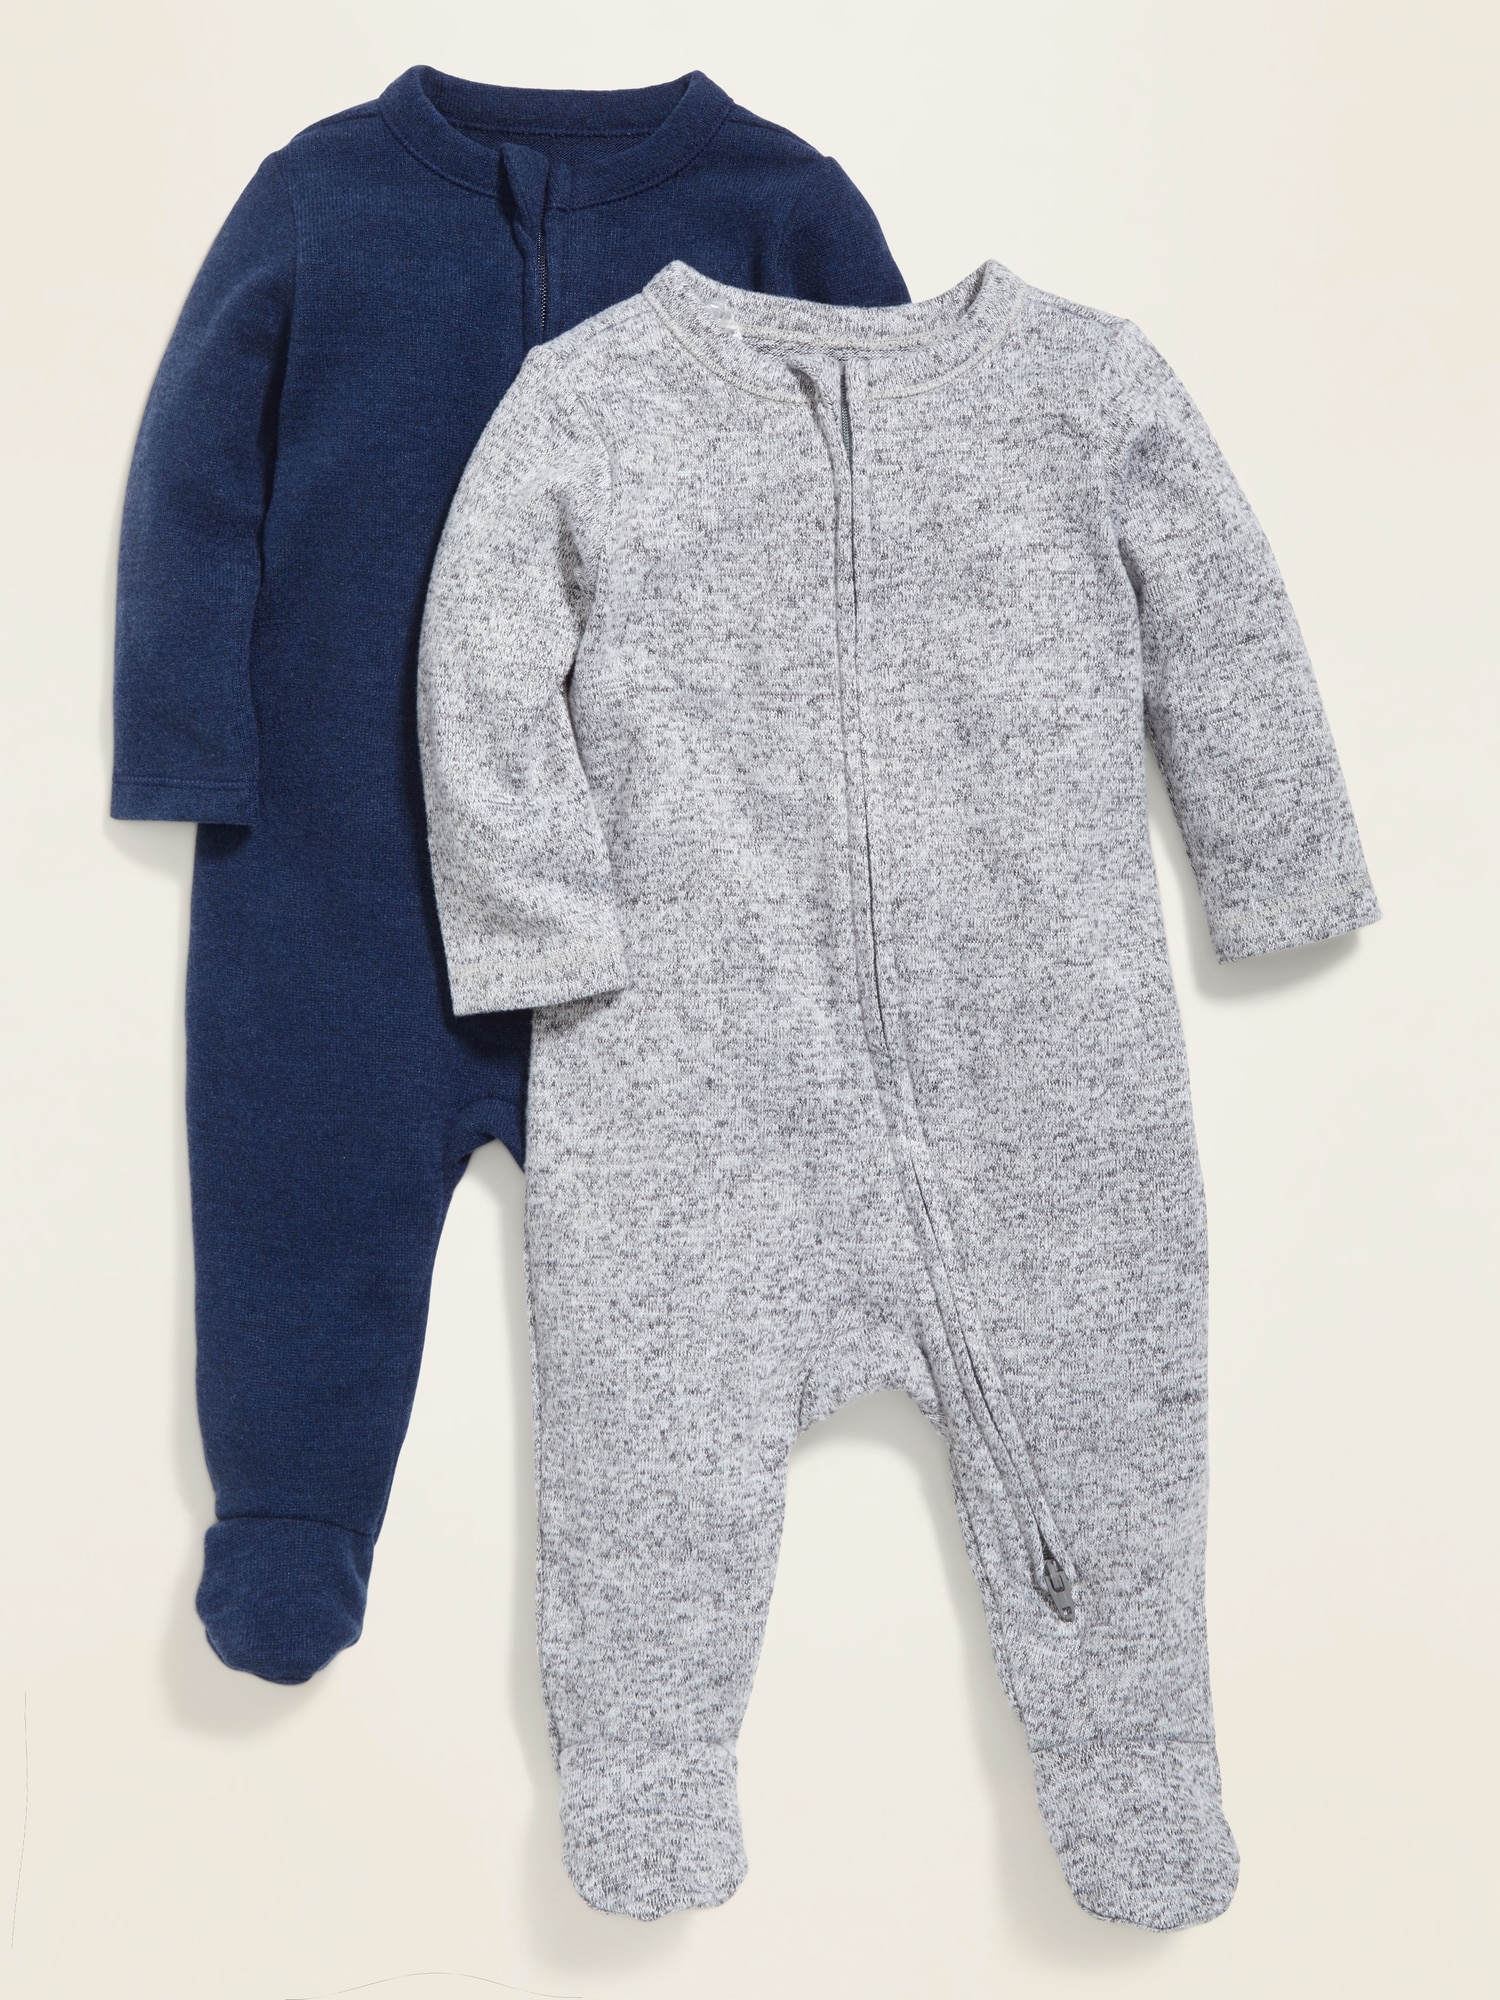 Unisex Cozy Sleep & Play One-Piece 2-Pack for Baby | Old Navy